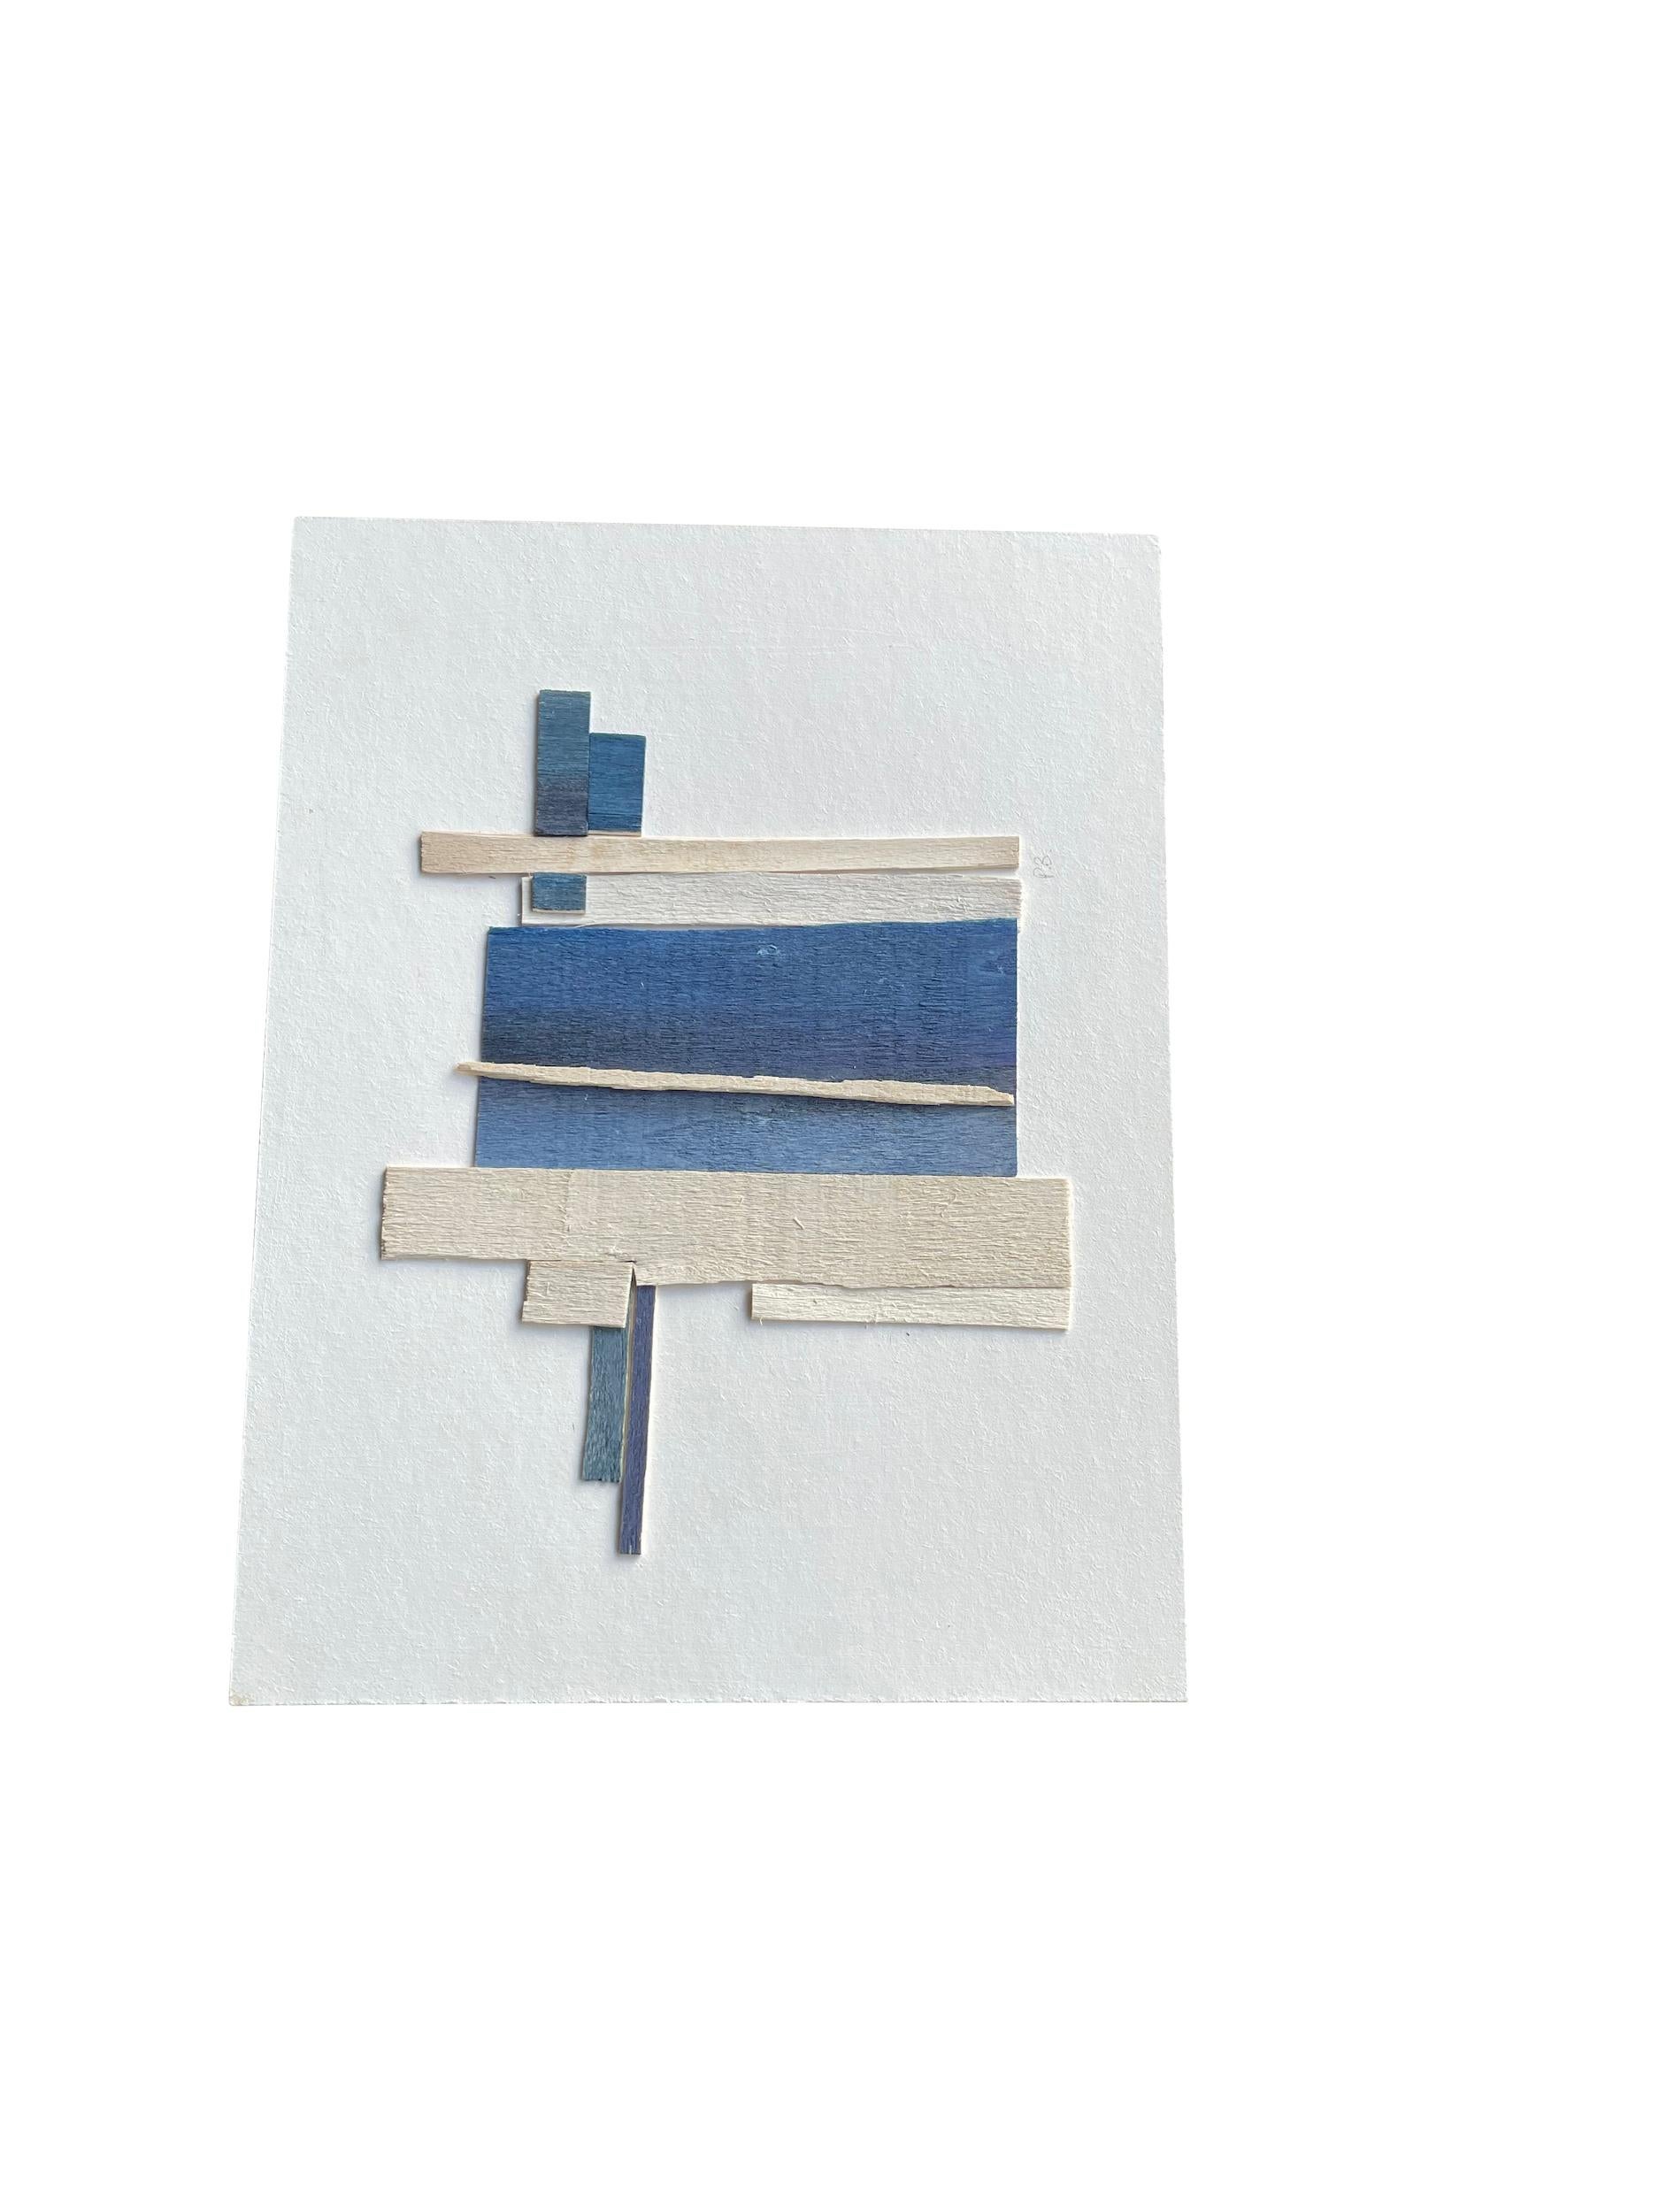 Contemporary French artist Perrine Blaise paints on thin slices of wood.
Weathered effect.
Shades of blue and cream.
Abstract shapes.
Framed in white wood.
Signed by the artist.
Coordinates well with P1444.